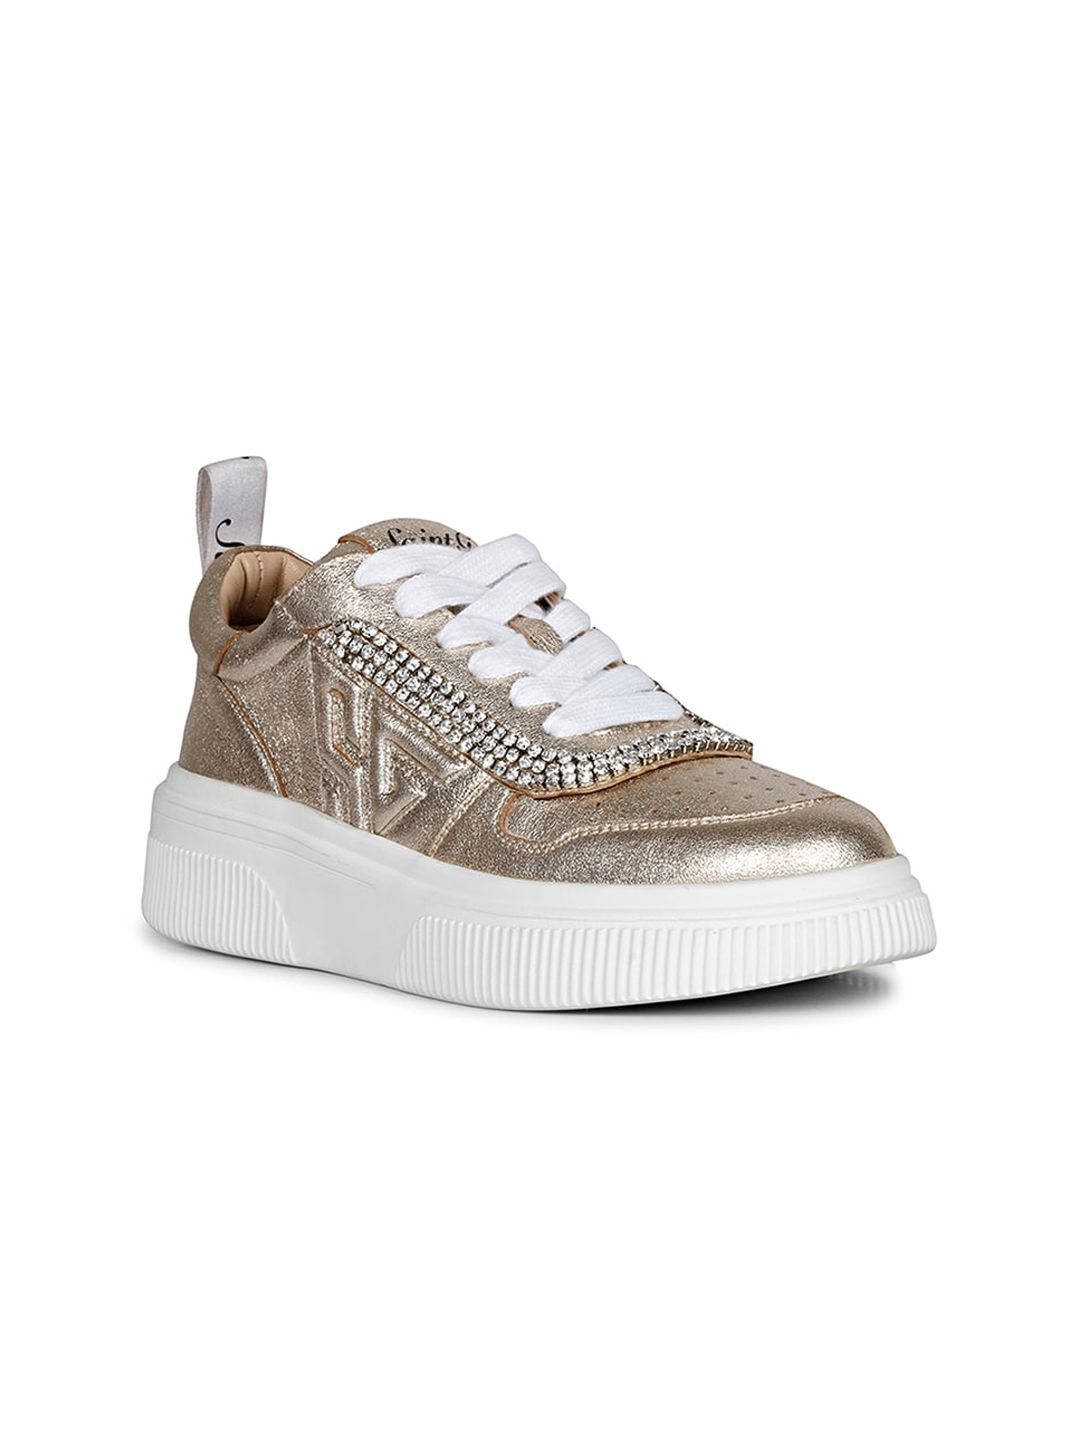 Saint G Women Perforations Embellished Leather Contrast Sole Sneakers Price in India